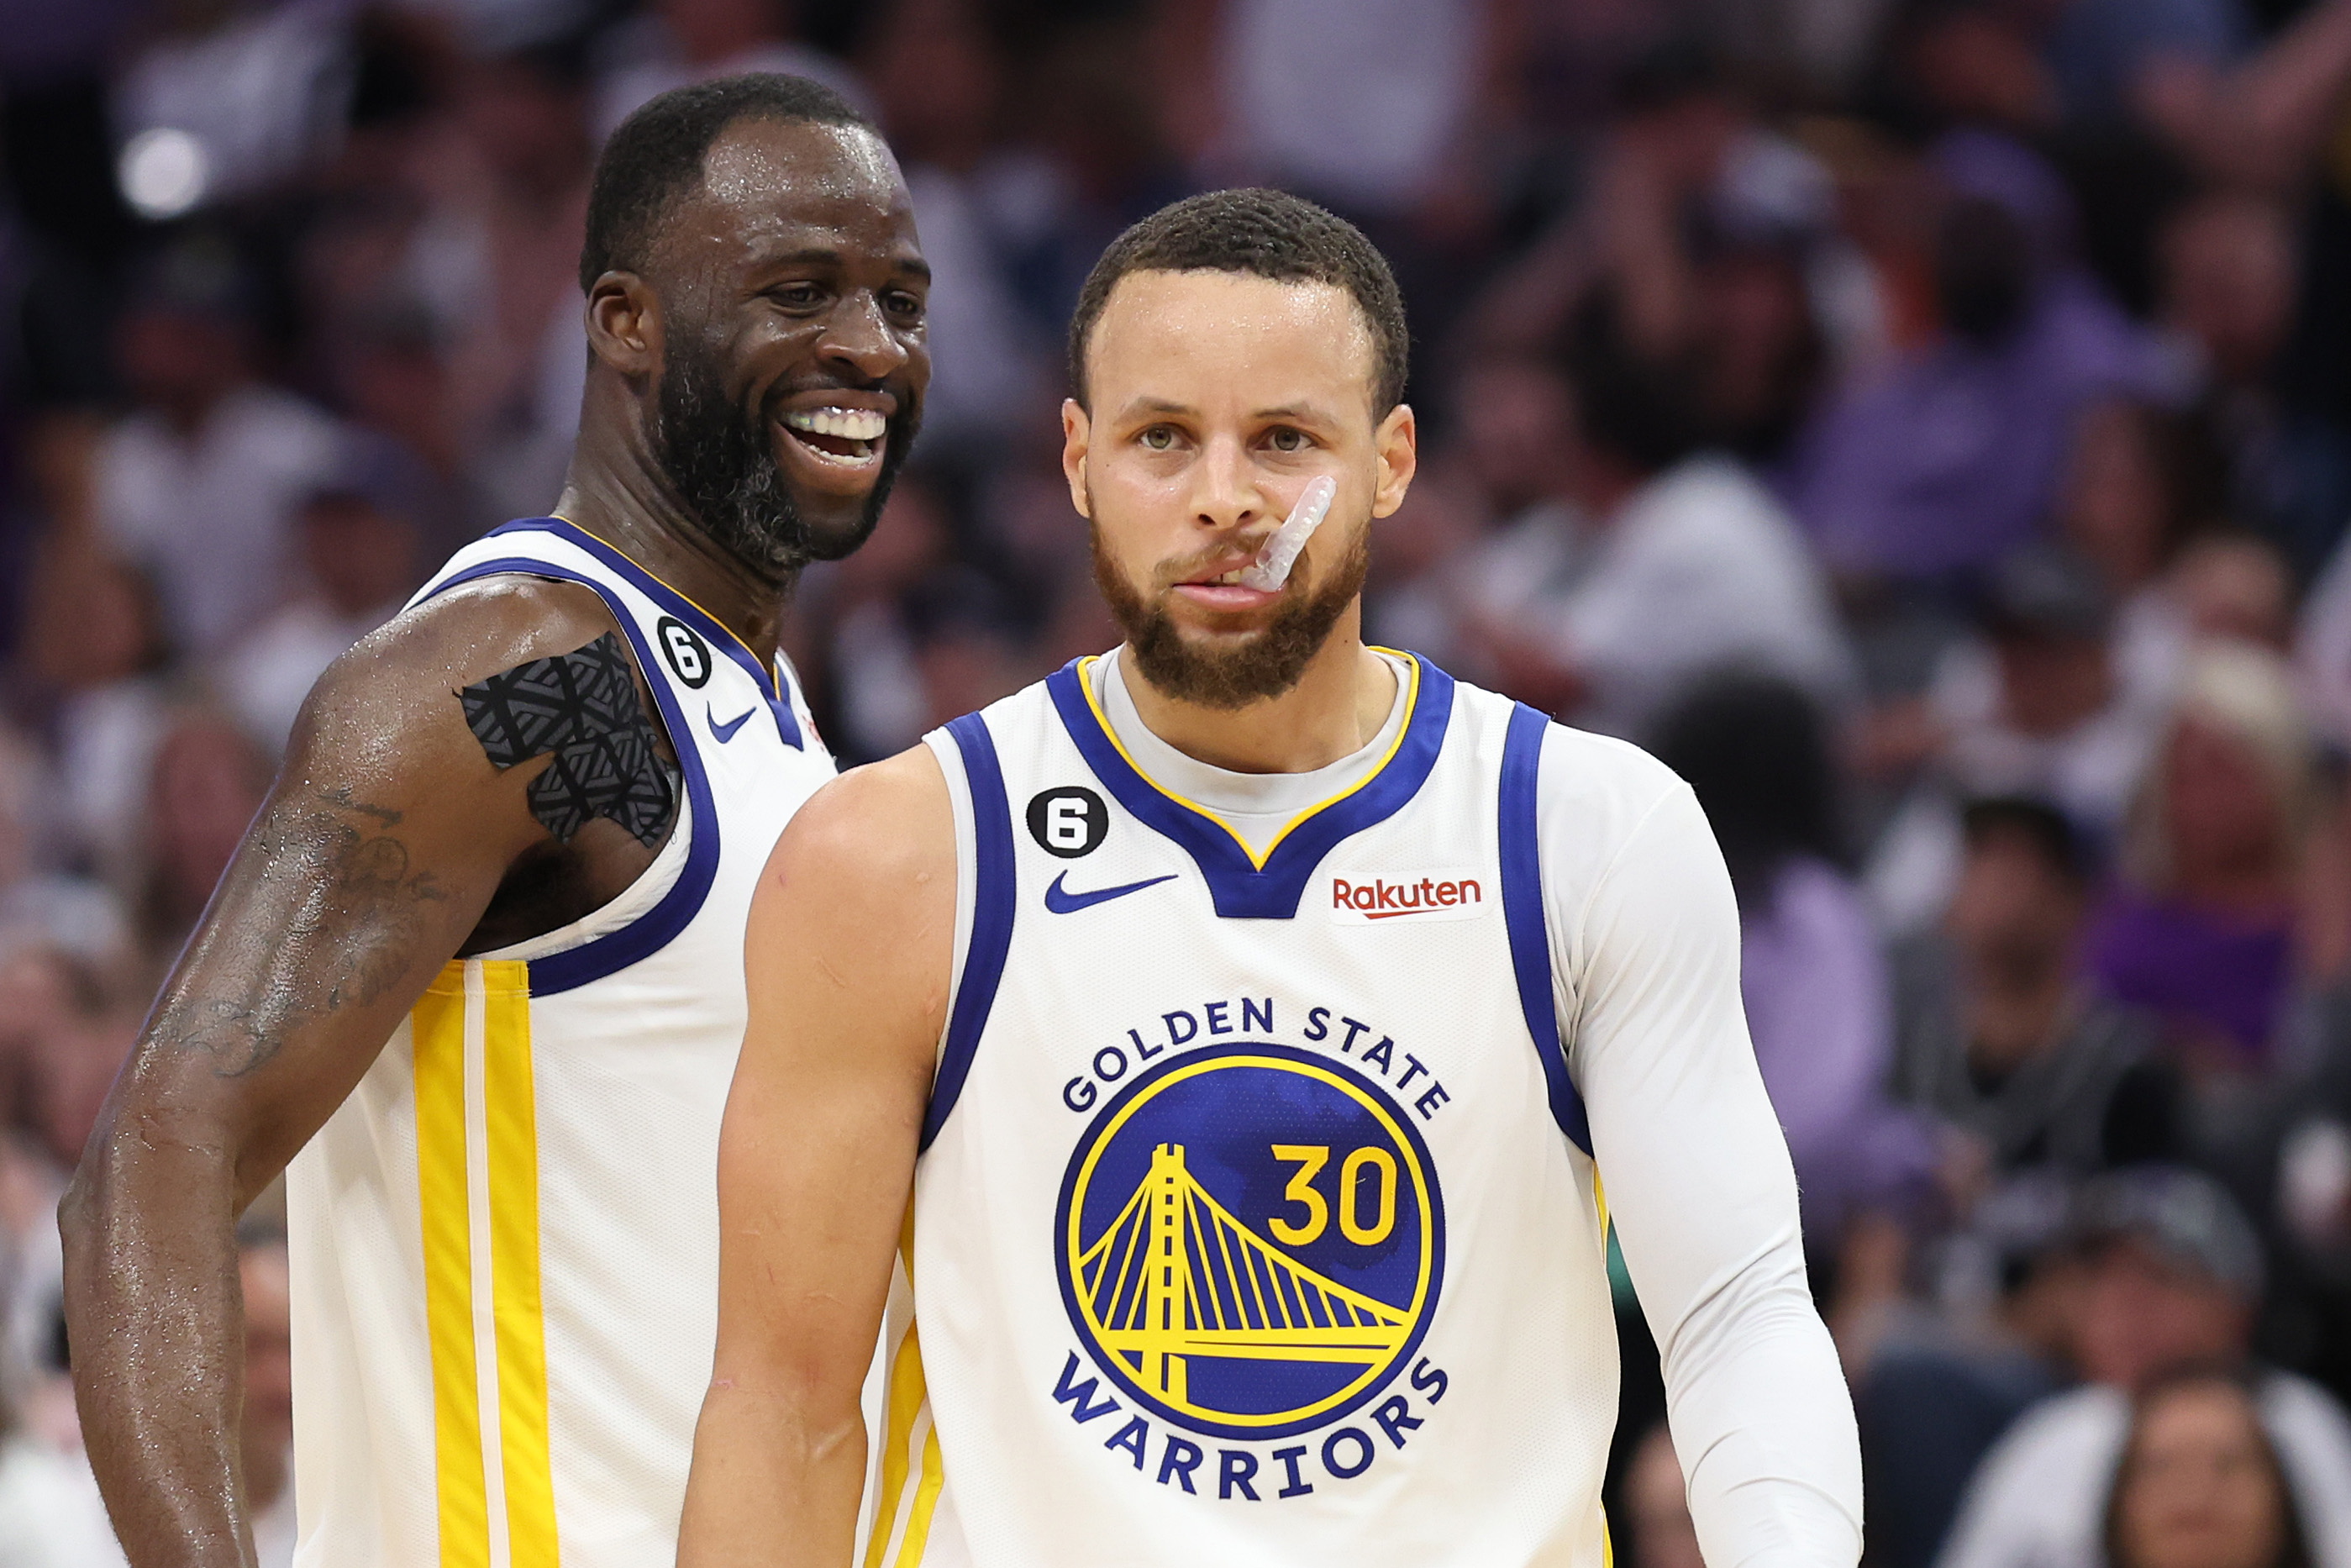 Steph Curry looking determined while Draymond Green smiles behind him